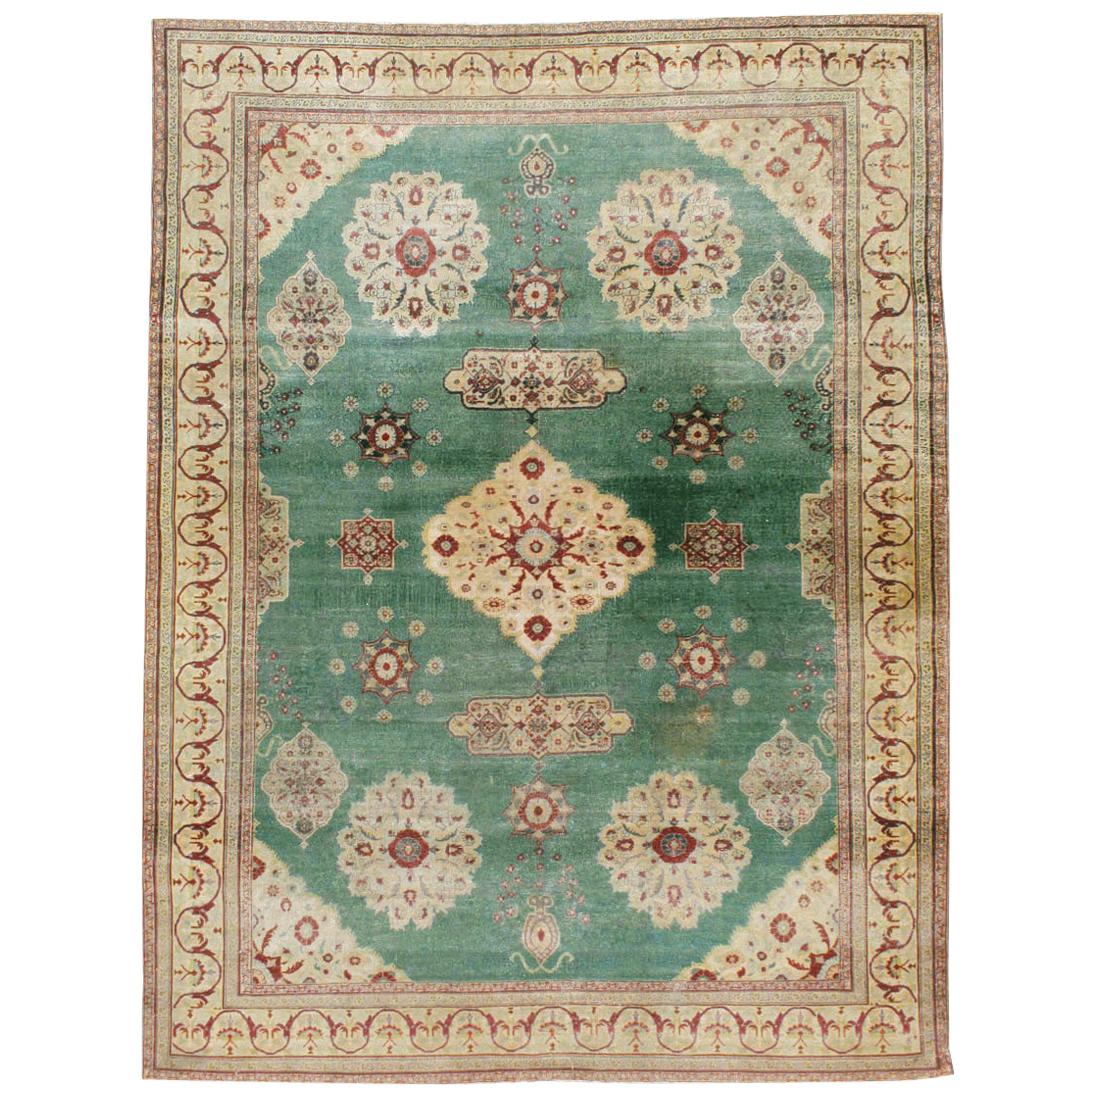 Early 20th Century Green, Red, and Beige Distressed Rug